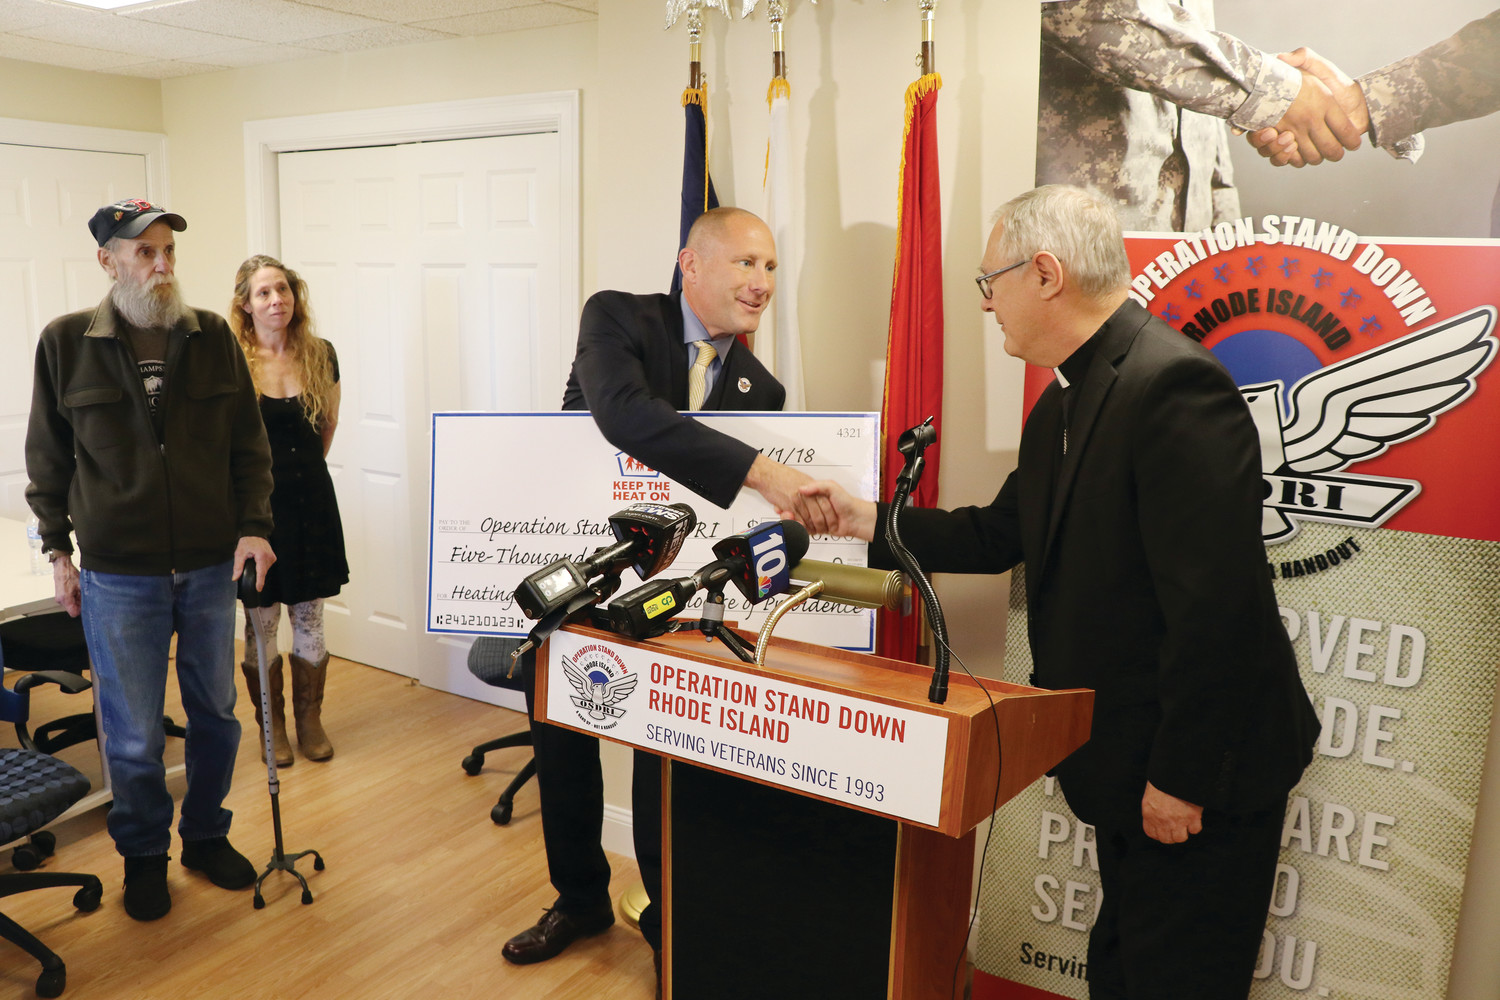 Bishop Thomas J. Tobin presents a donation for $5,000 from ‘Keep the Heat On’ to Erik B. Wallin, Captain USAF (Fmr.), executive director and general counsel for Operation Stand Down RI, to help the organization provide heating assistance to veterans in need.